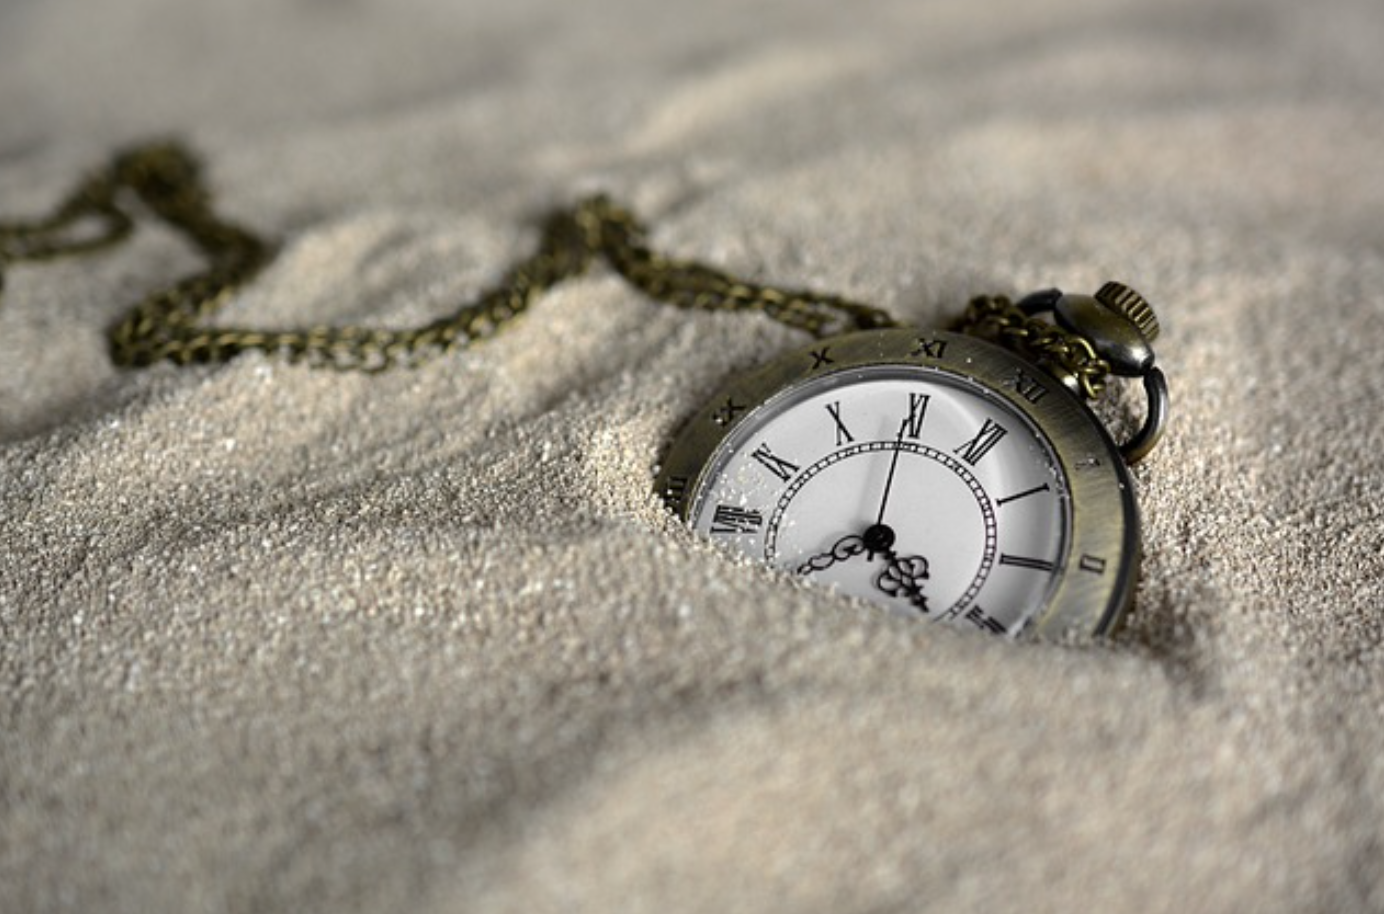 Pocket watch with chain sitting in sand; image by Anncapictures, via Pixabay.com.